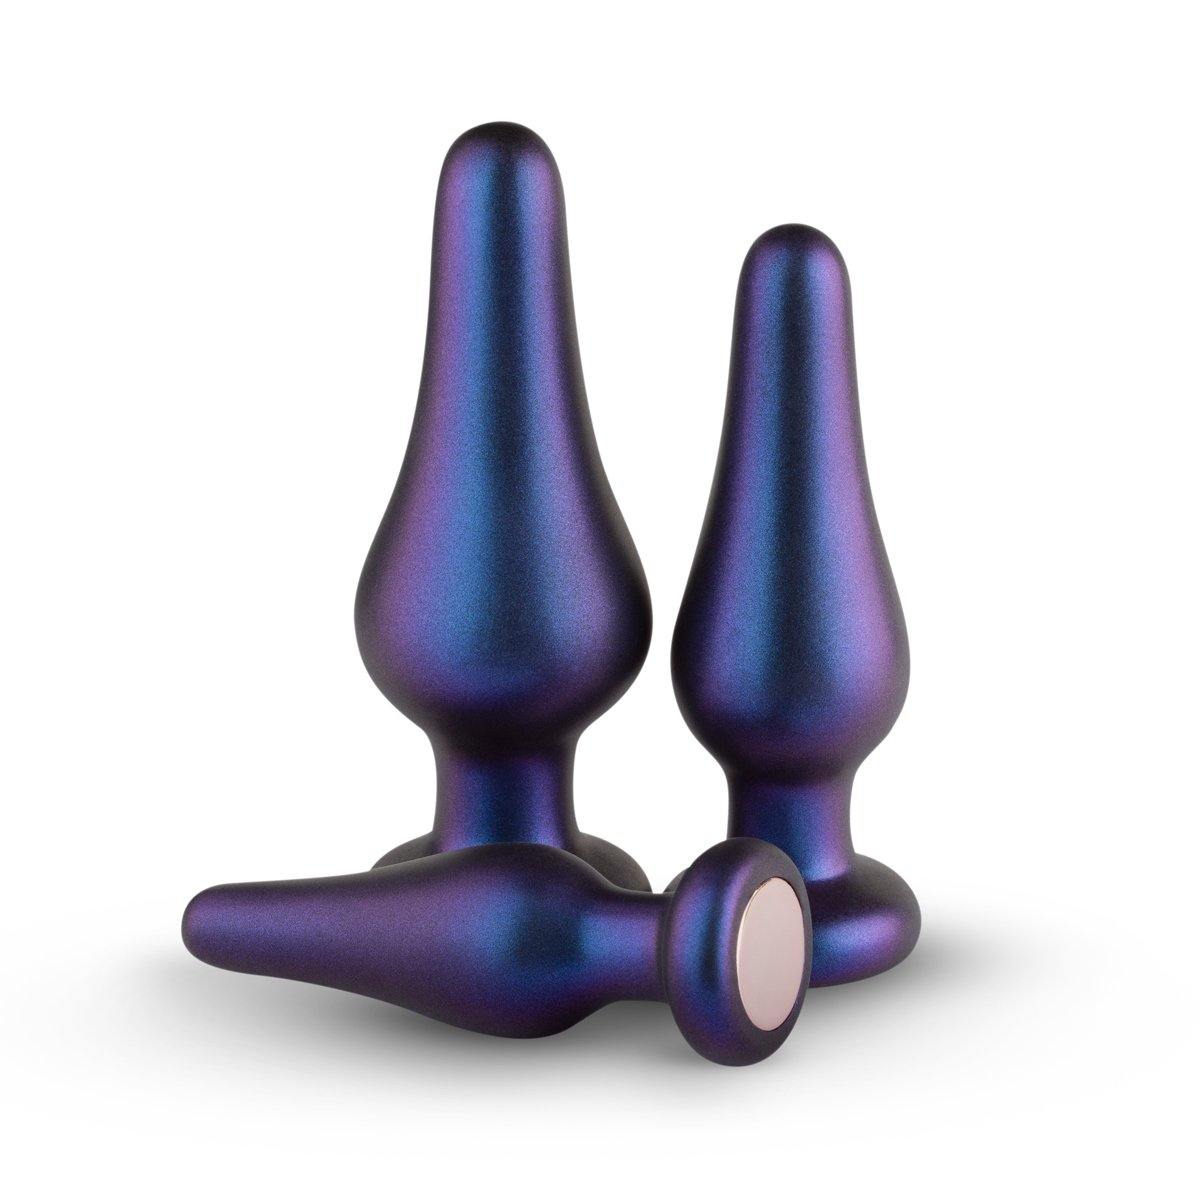 Hueman Comets Butt Plug Set - Buy At Luxury Toy X - Free 3-Day Shipping